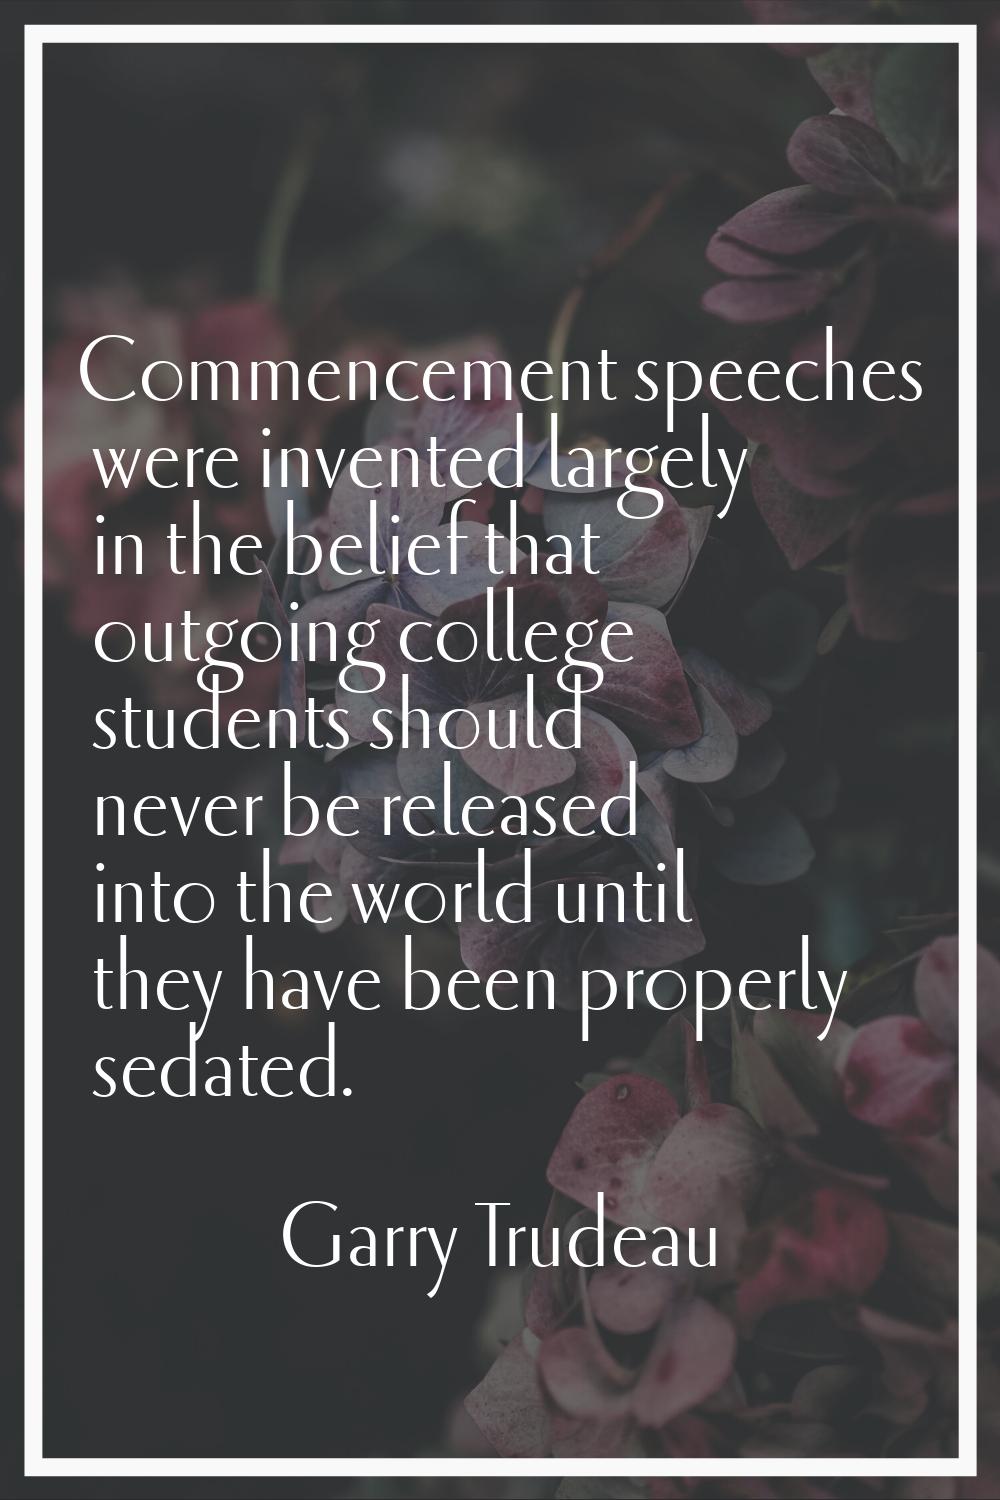 Commencement speeches were invented largely in the belief that outgoing college students should nev